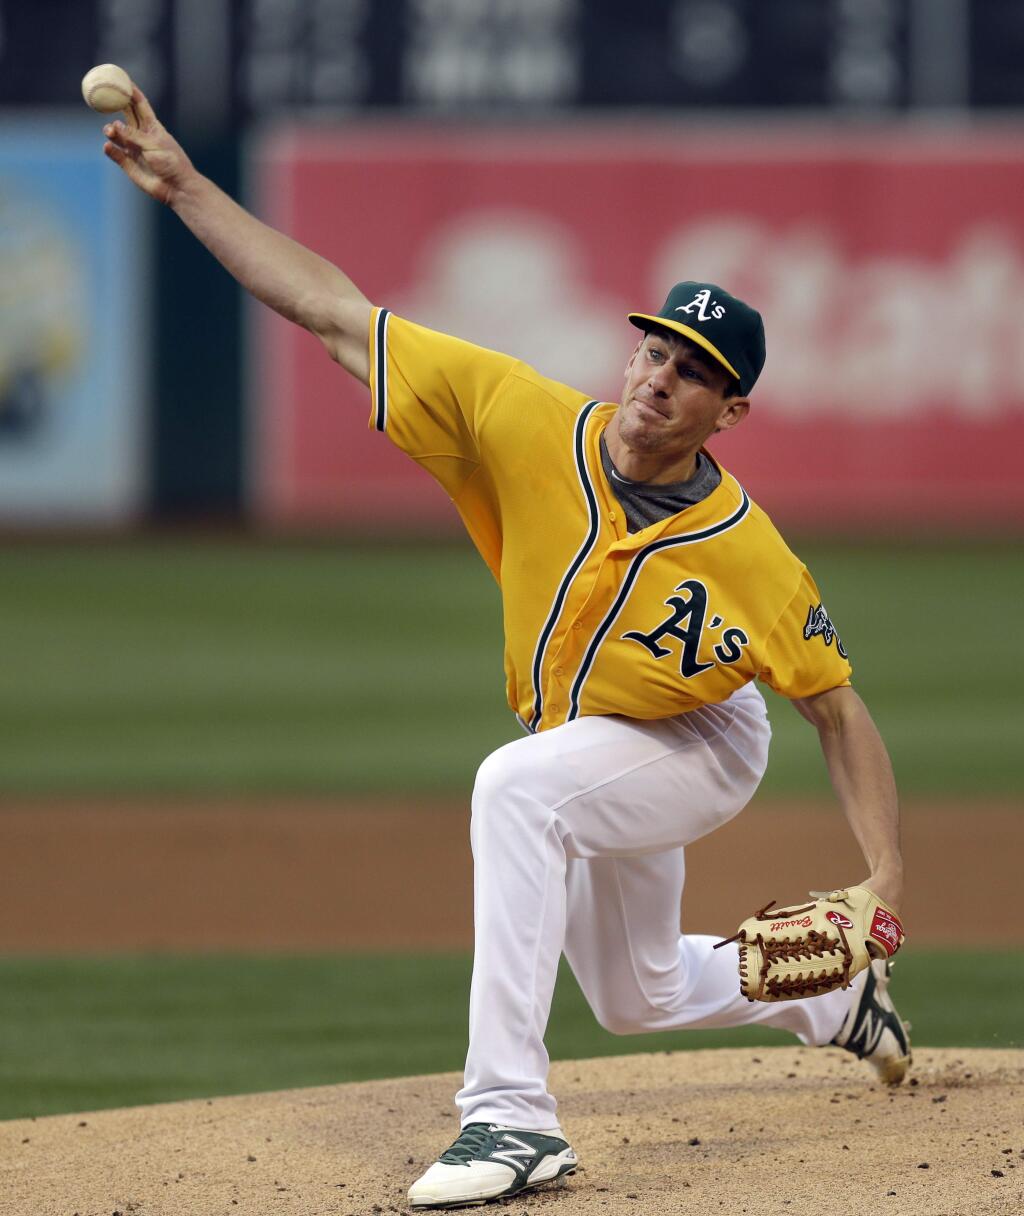 Oakland Athletics pitcher Chris Bassitt works against the Cleveland Indians in the first inning of a baseball game Thursday, July 30, 2015, in Oakland, Calif. (AP Photo/Ben Margot)